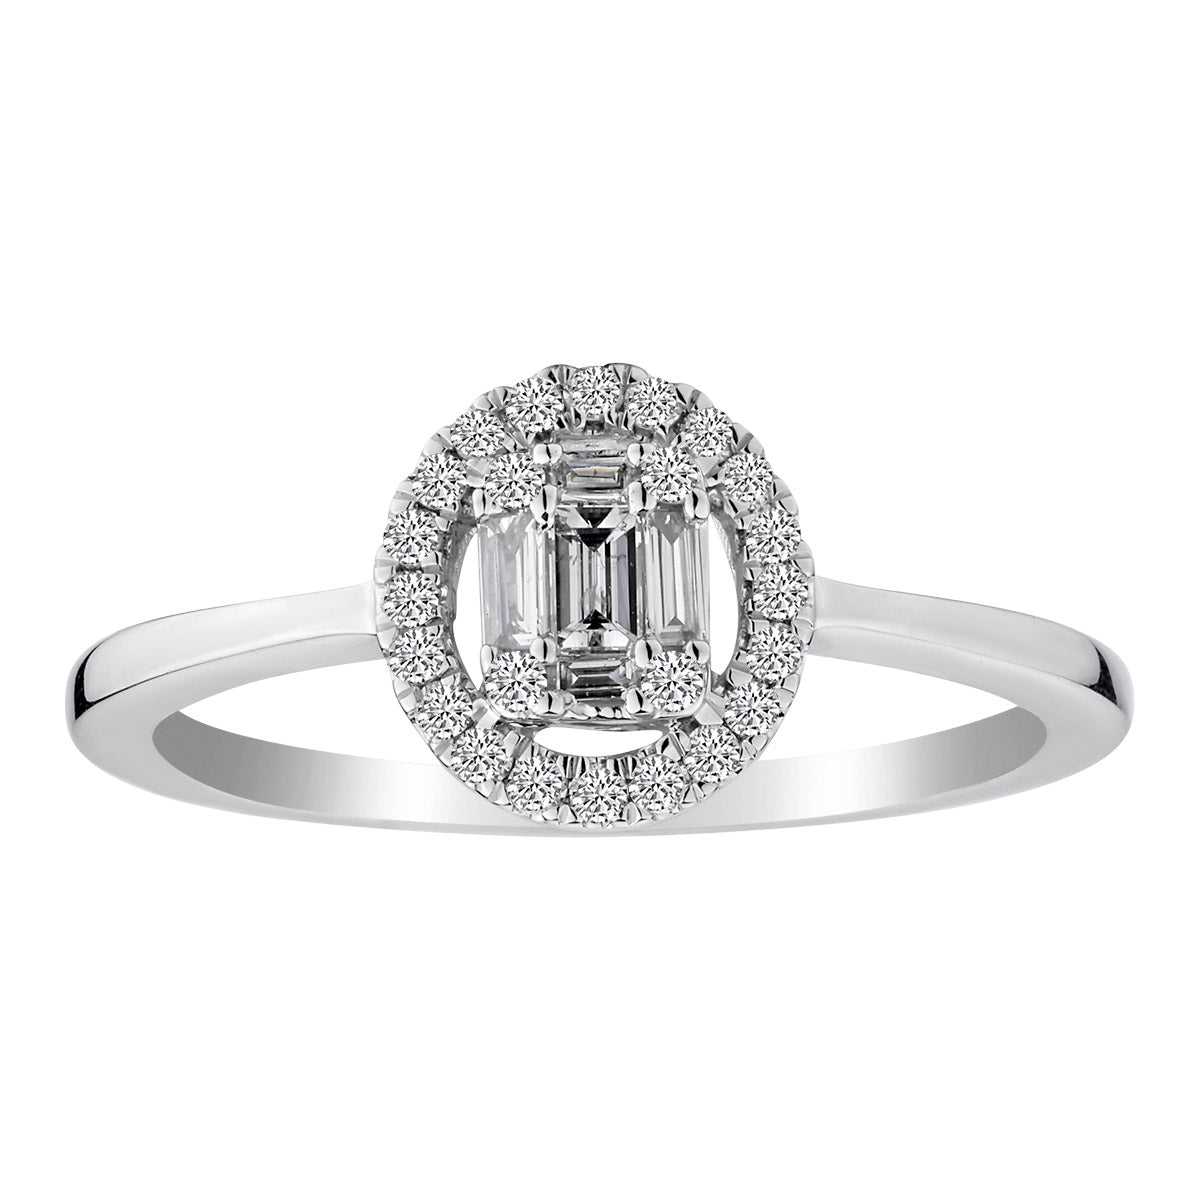 .27 Carat Diamond Halo Ring,  10kt White Gold. Griffin Jewellery Designs